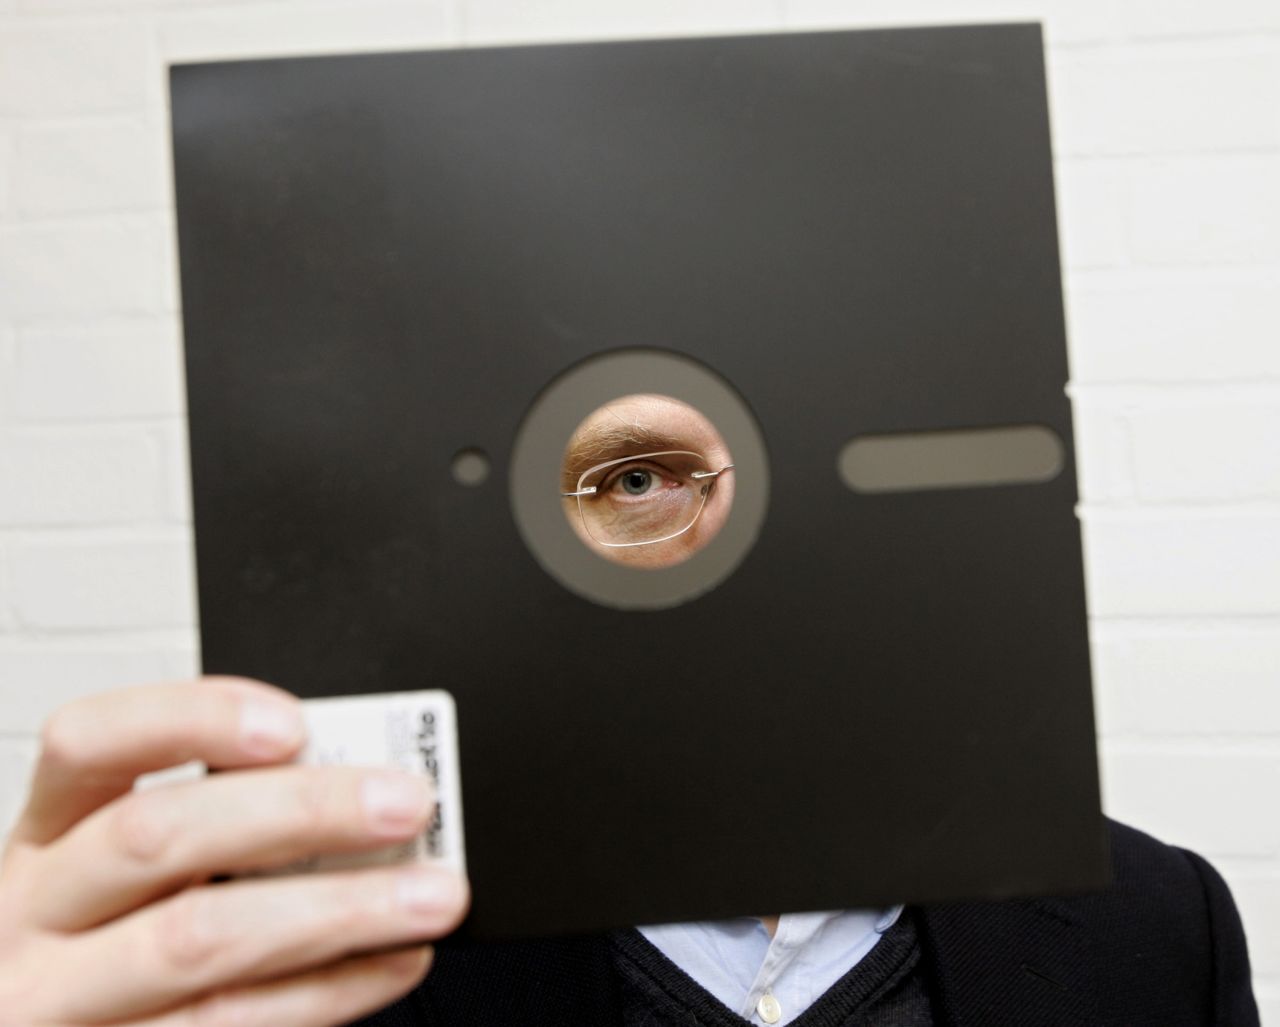 Eight-inch floppy discs became commercially available in the 1970s. They allowed up to 1.2 megabytes of storage capacity. Today, a flash drive can hold up to 1 terabyte and comes in all sorts of practical novelty designs.